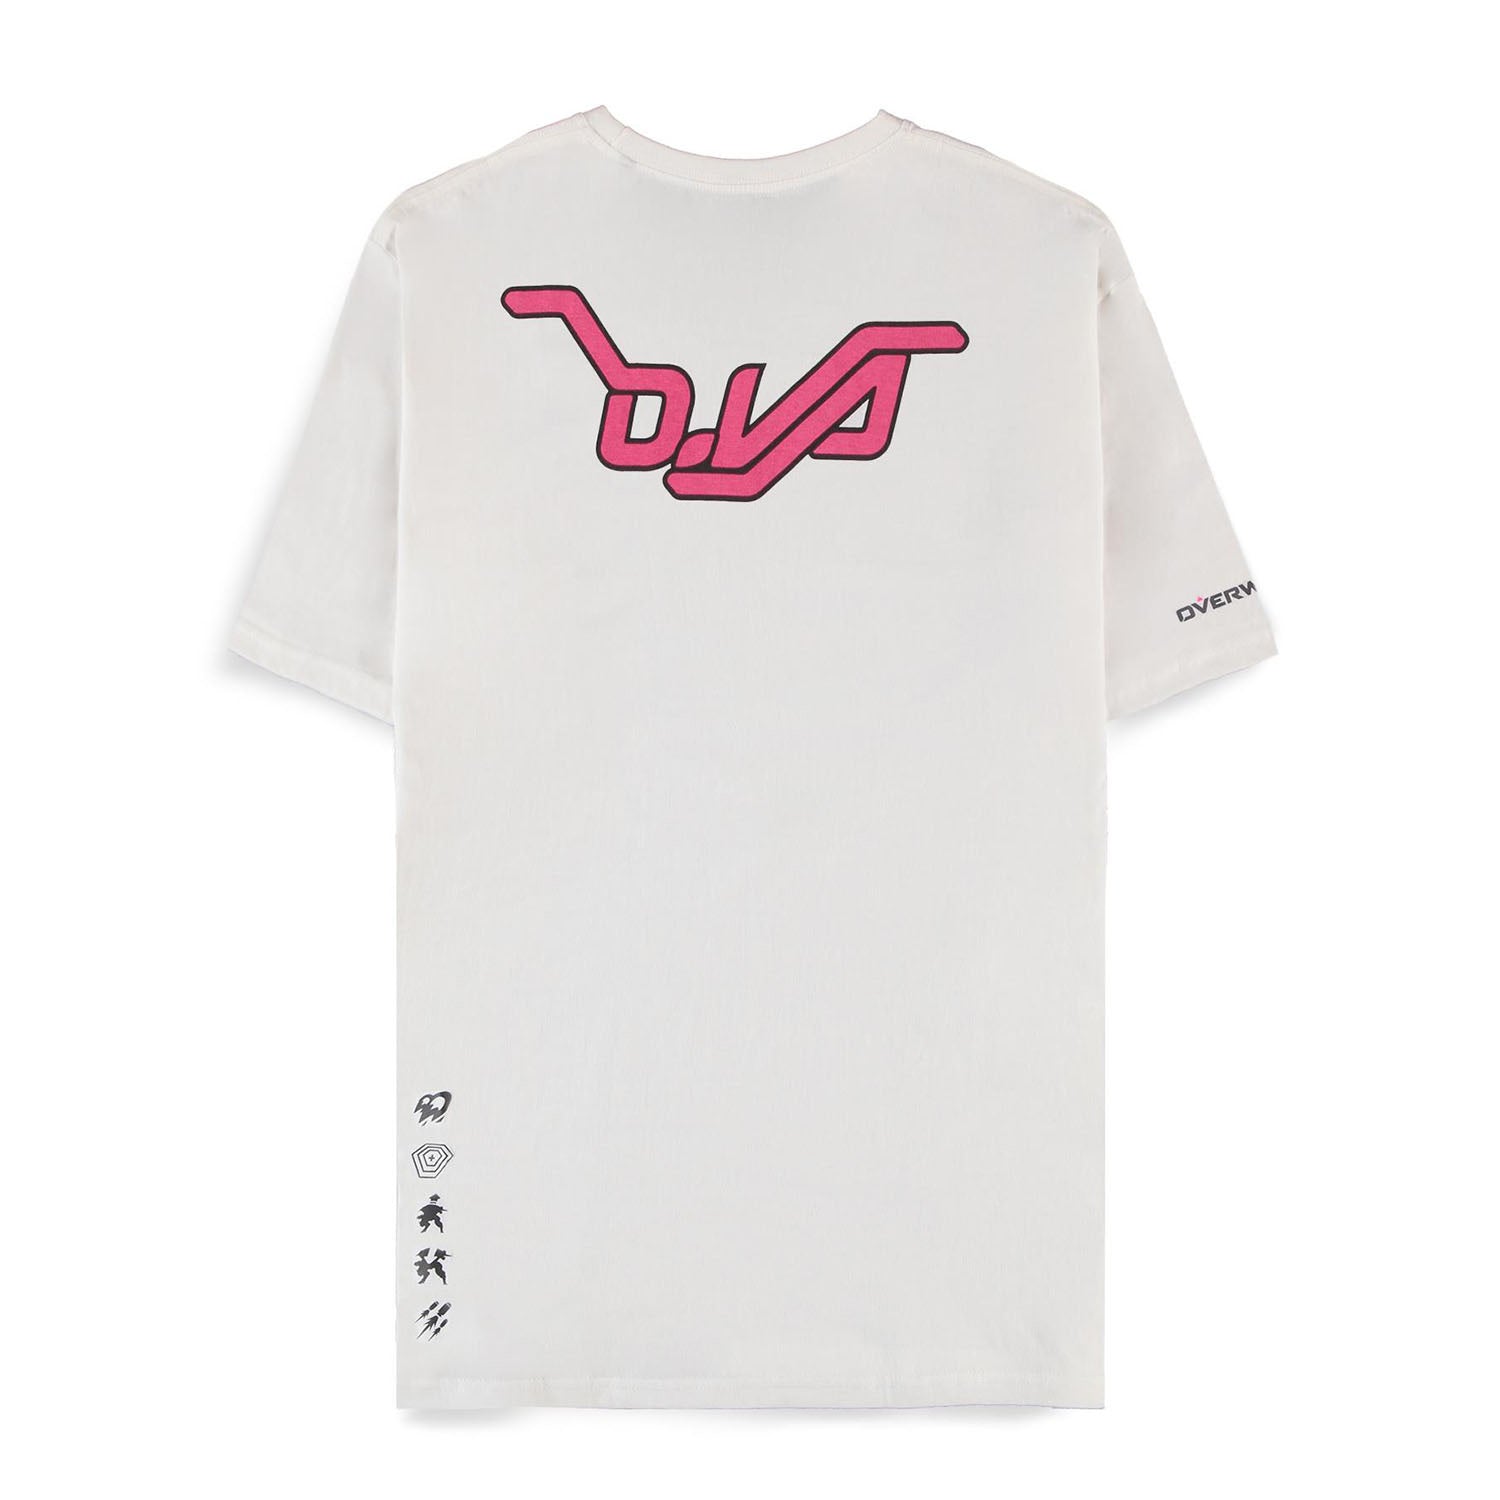 Overwatch D.VA White Fusion Cannons T-Shirt - Back View